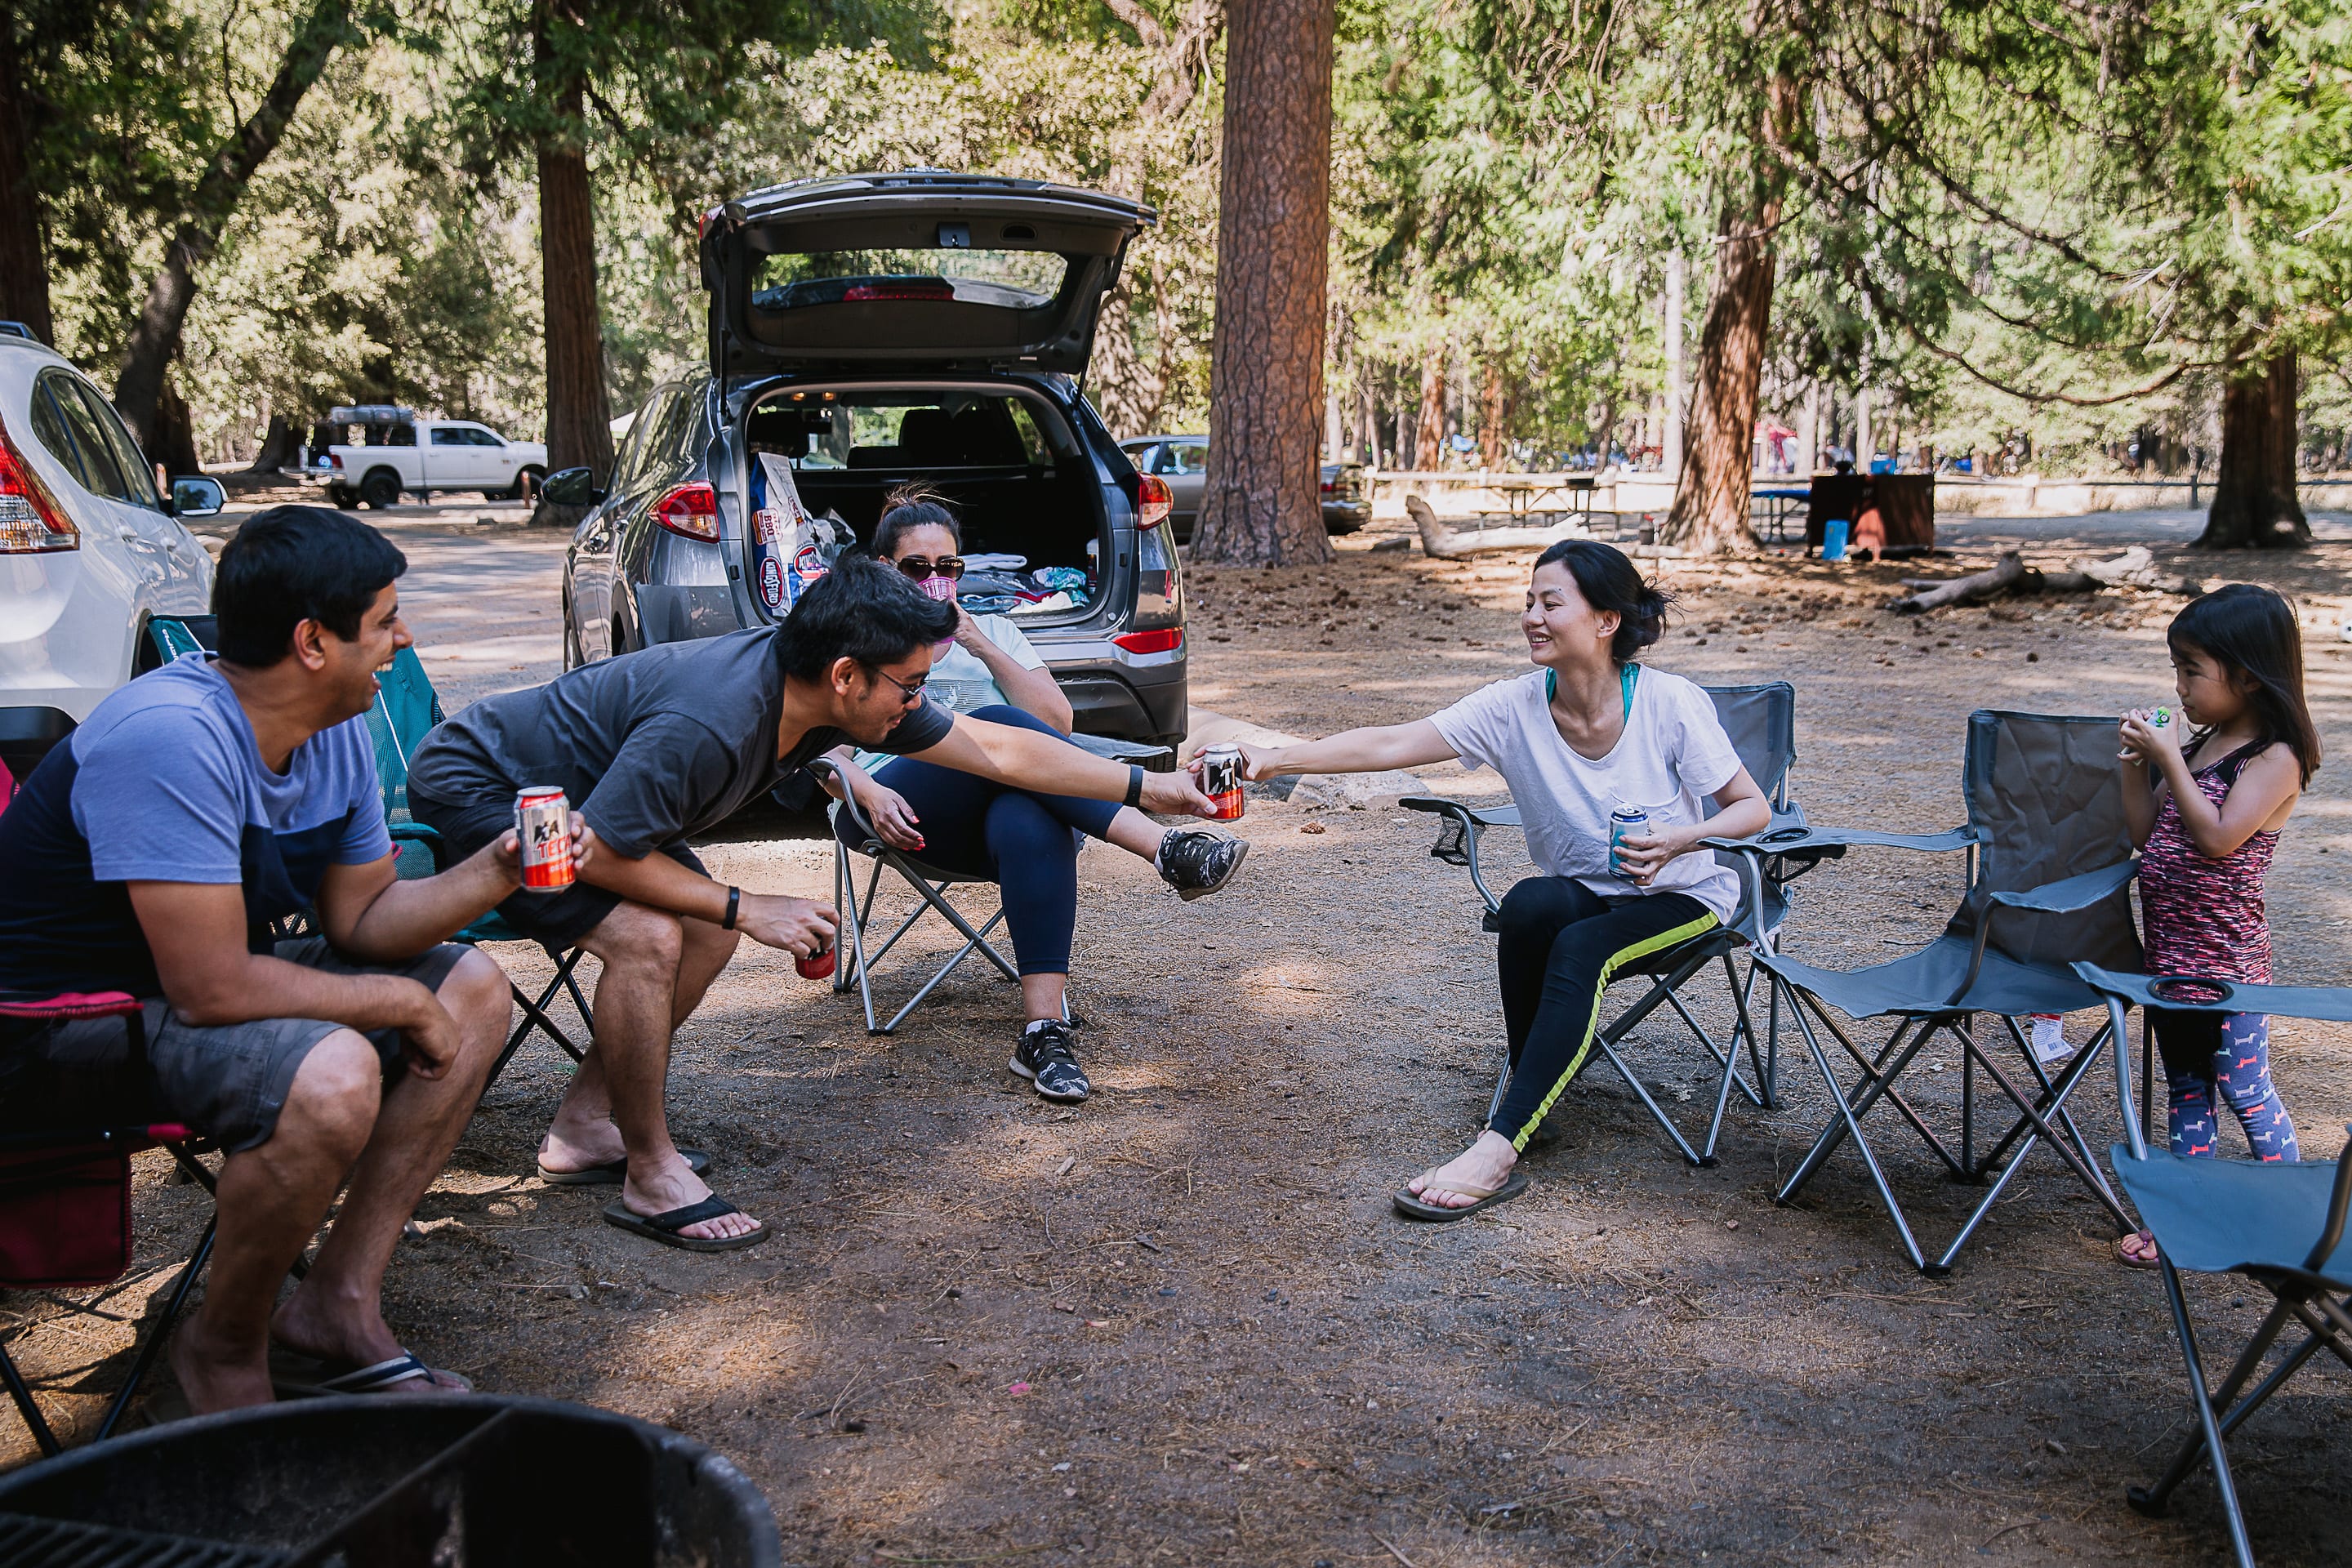 Our First Camping Experience #yosemite #camping #outdoor #photography | Playful Cooking